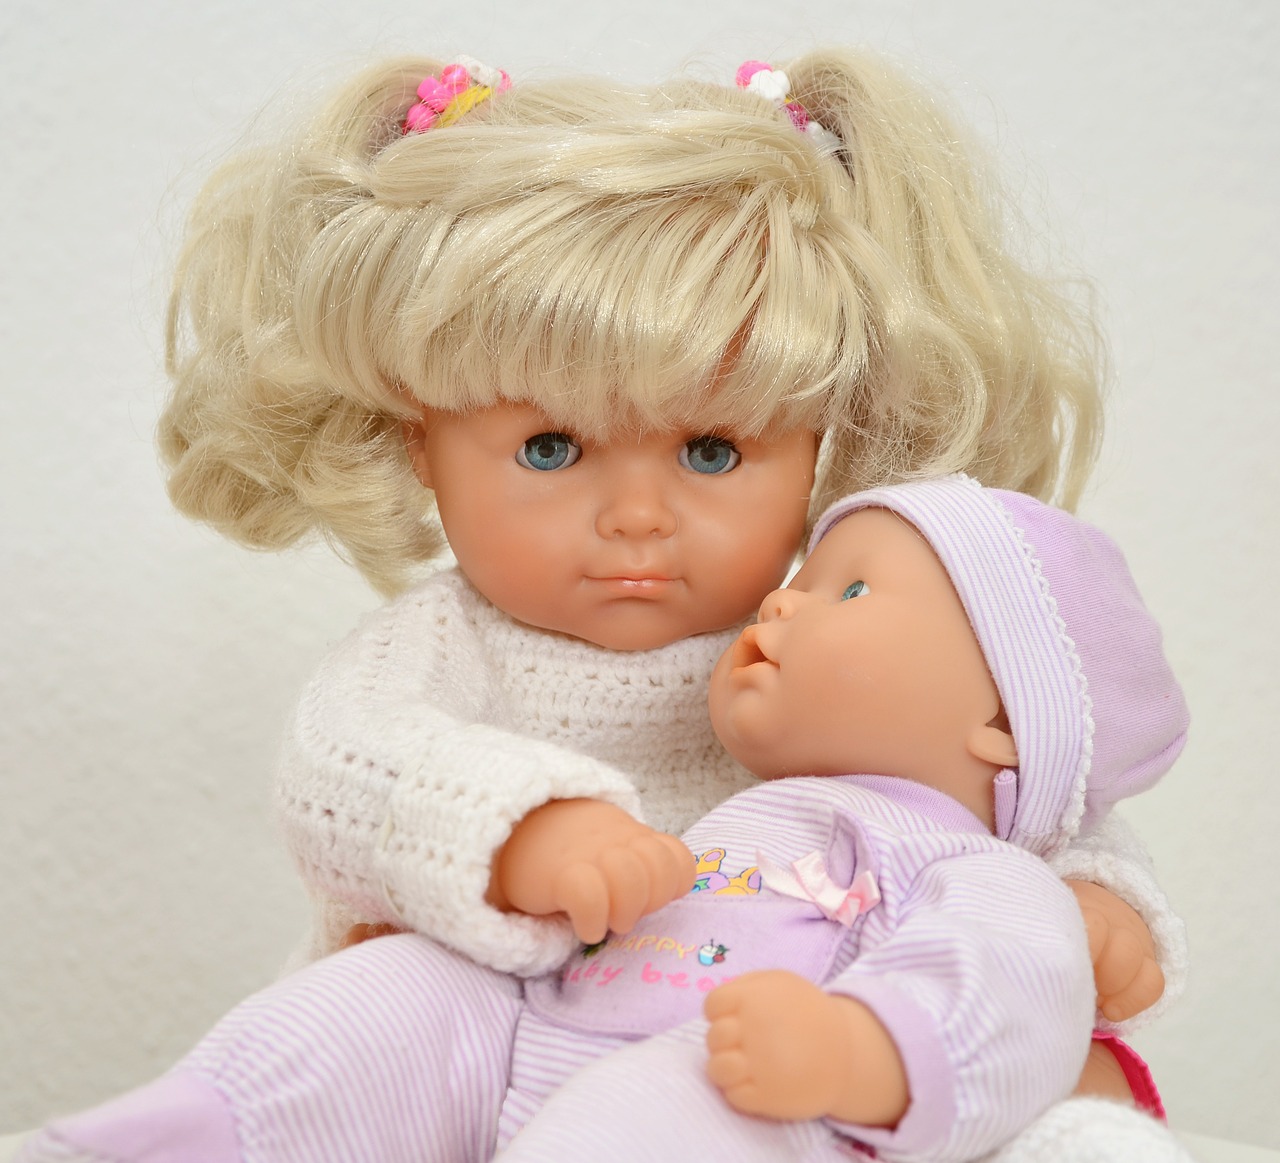 dolls doll face toys free photo